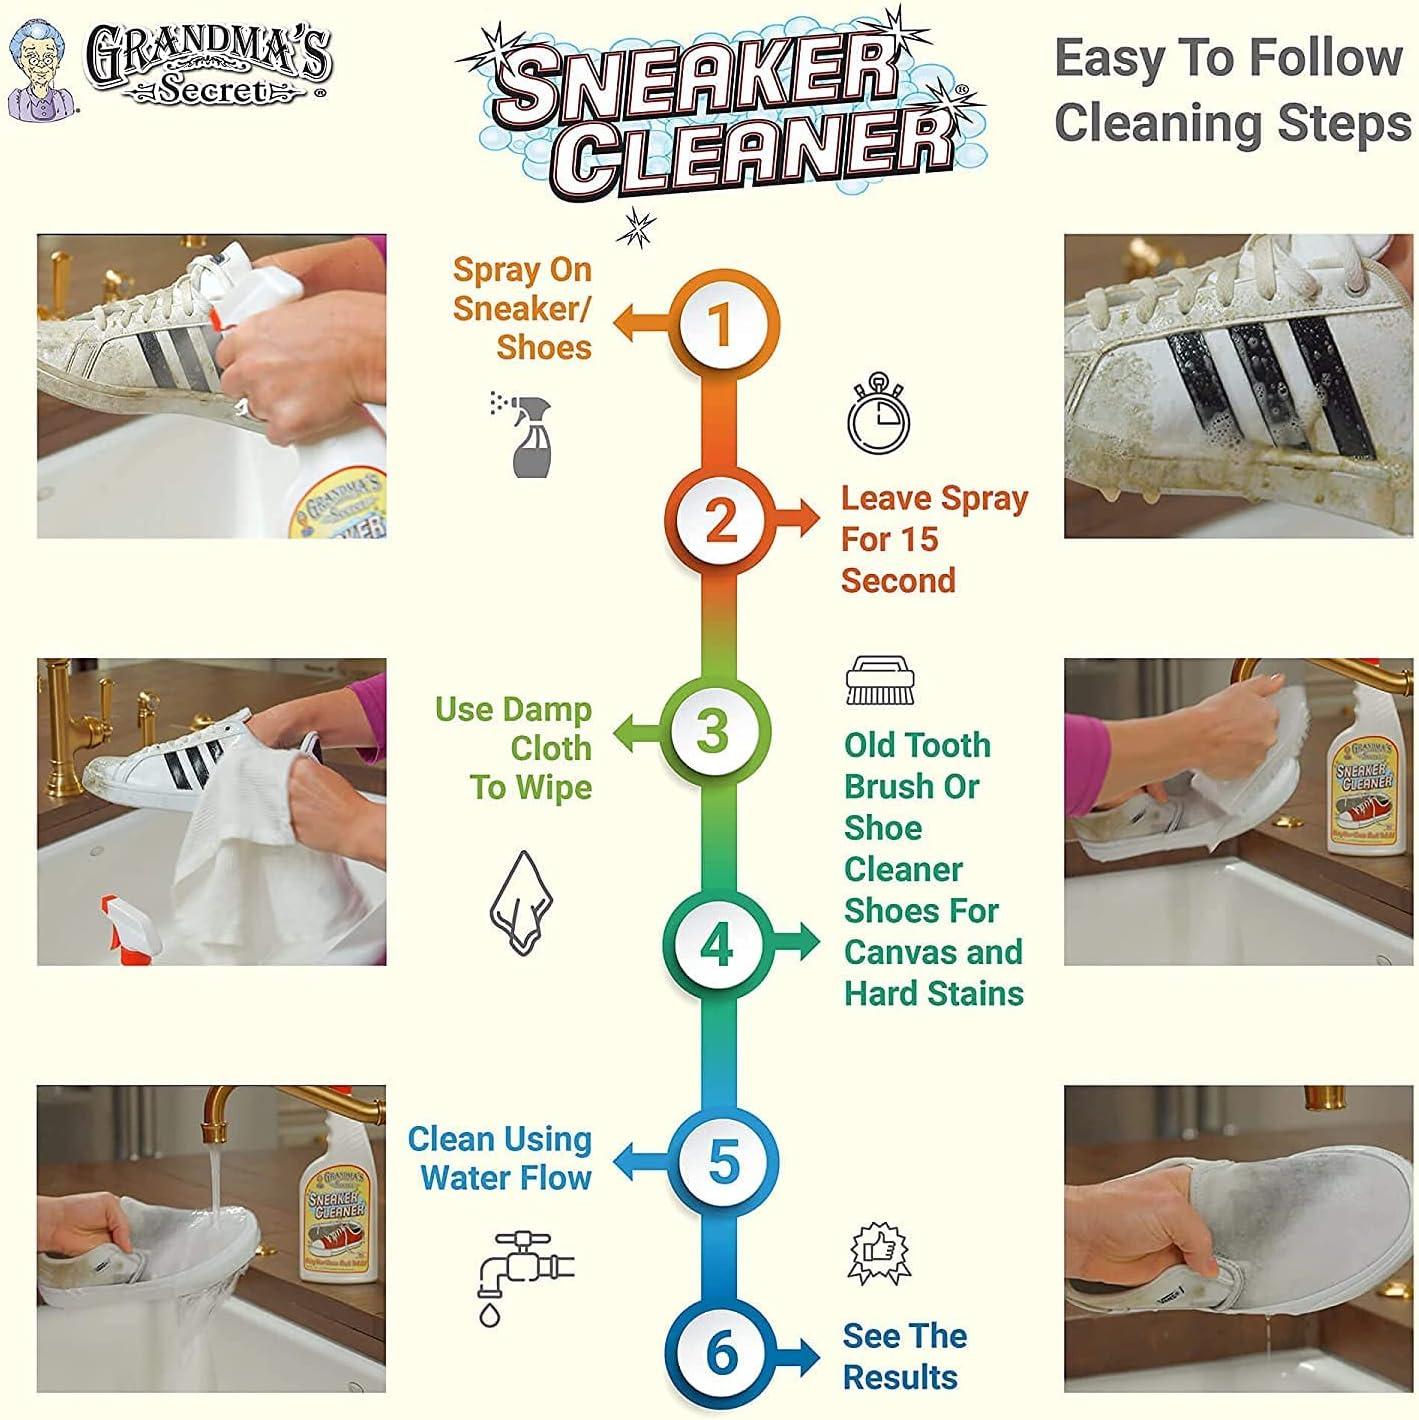 How to Use Grandmas Secret Sneaker Cleaner (UNBOXING & REVIEW!) 